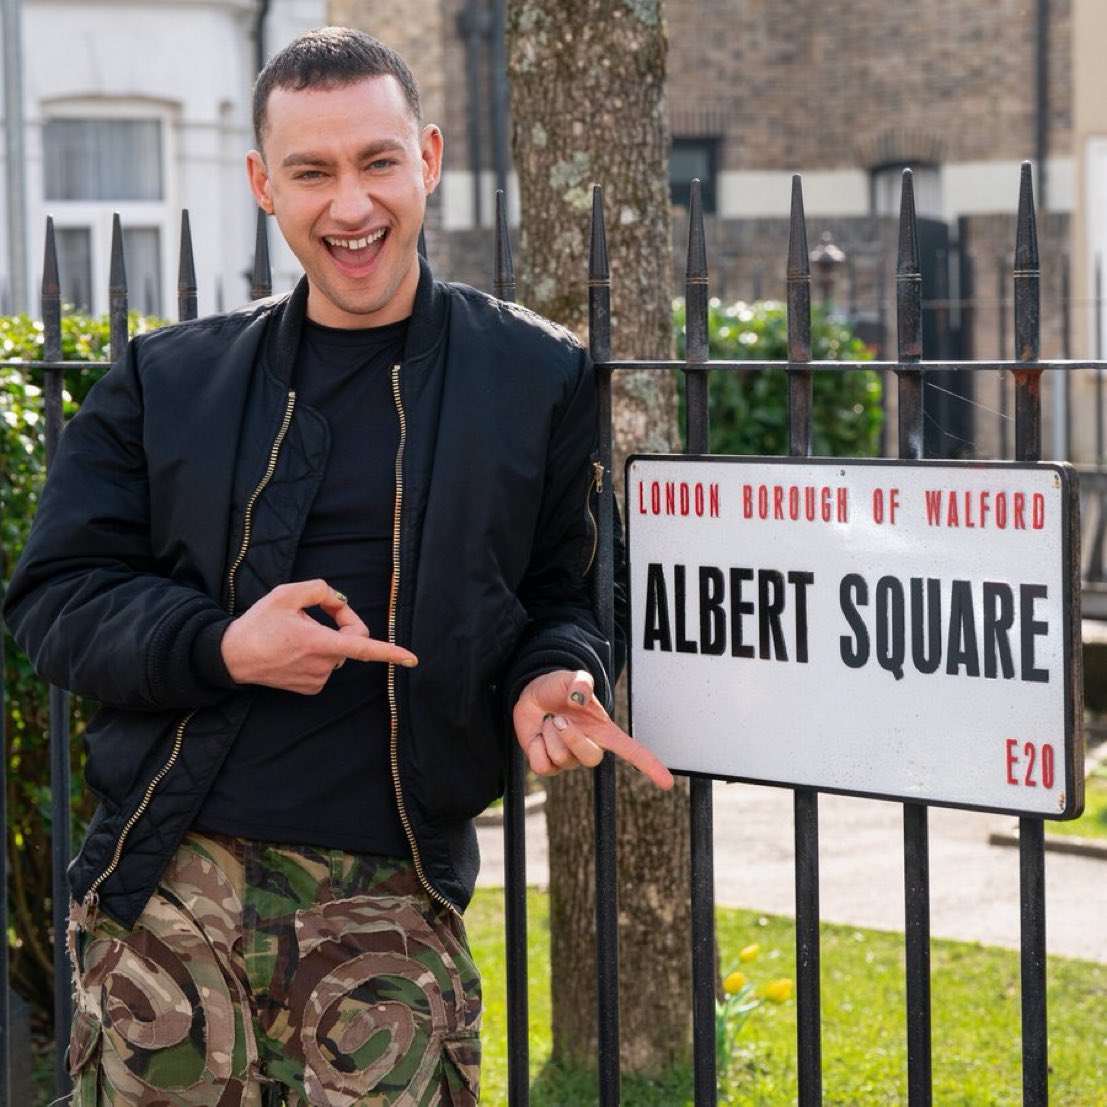 Ahead of his performance at the Eurovision song contest, Olly is set to make a surprise visit to #EastEnders' Albert Square...

In my opinion, I simply don’t get it! 🤷🏼‍♂️
#OllyAlexander